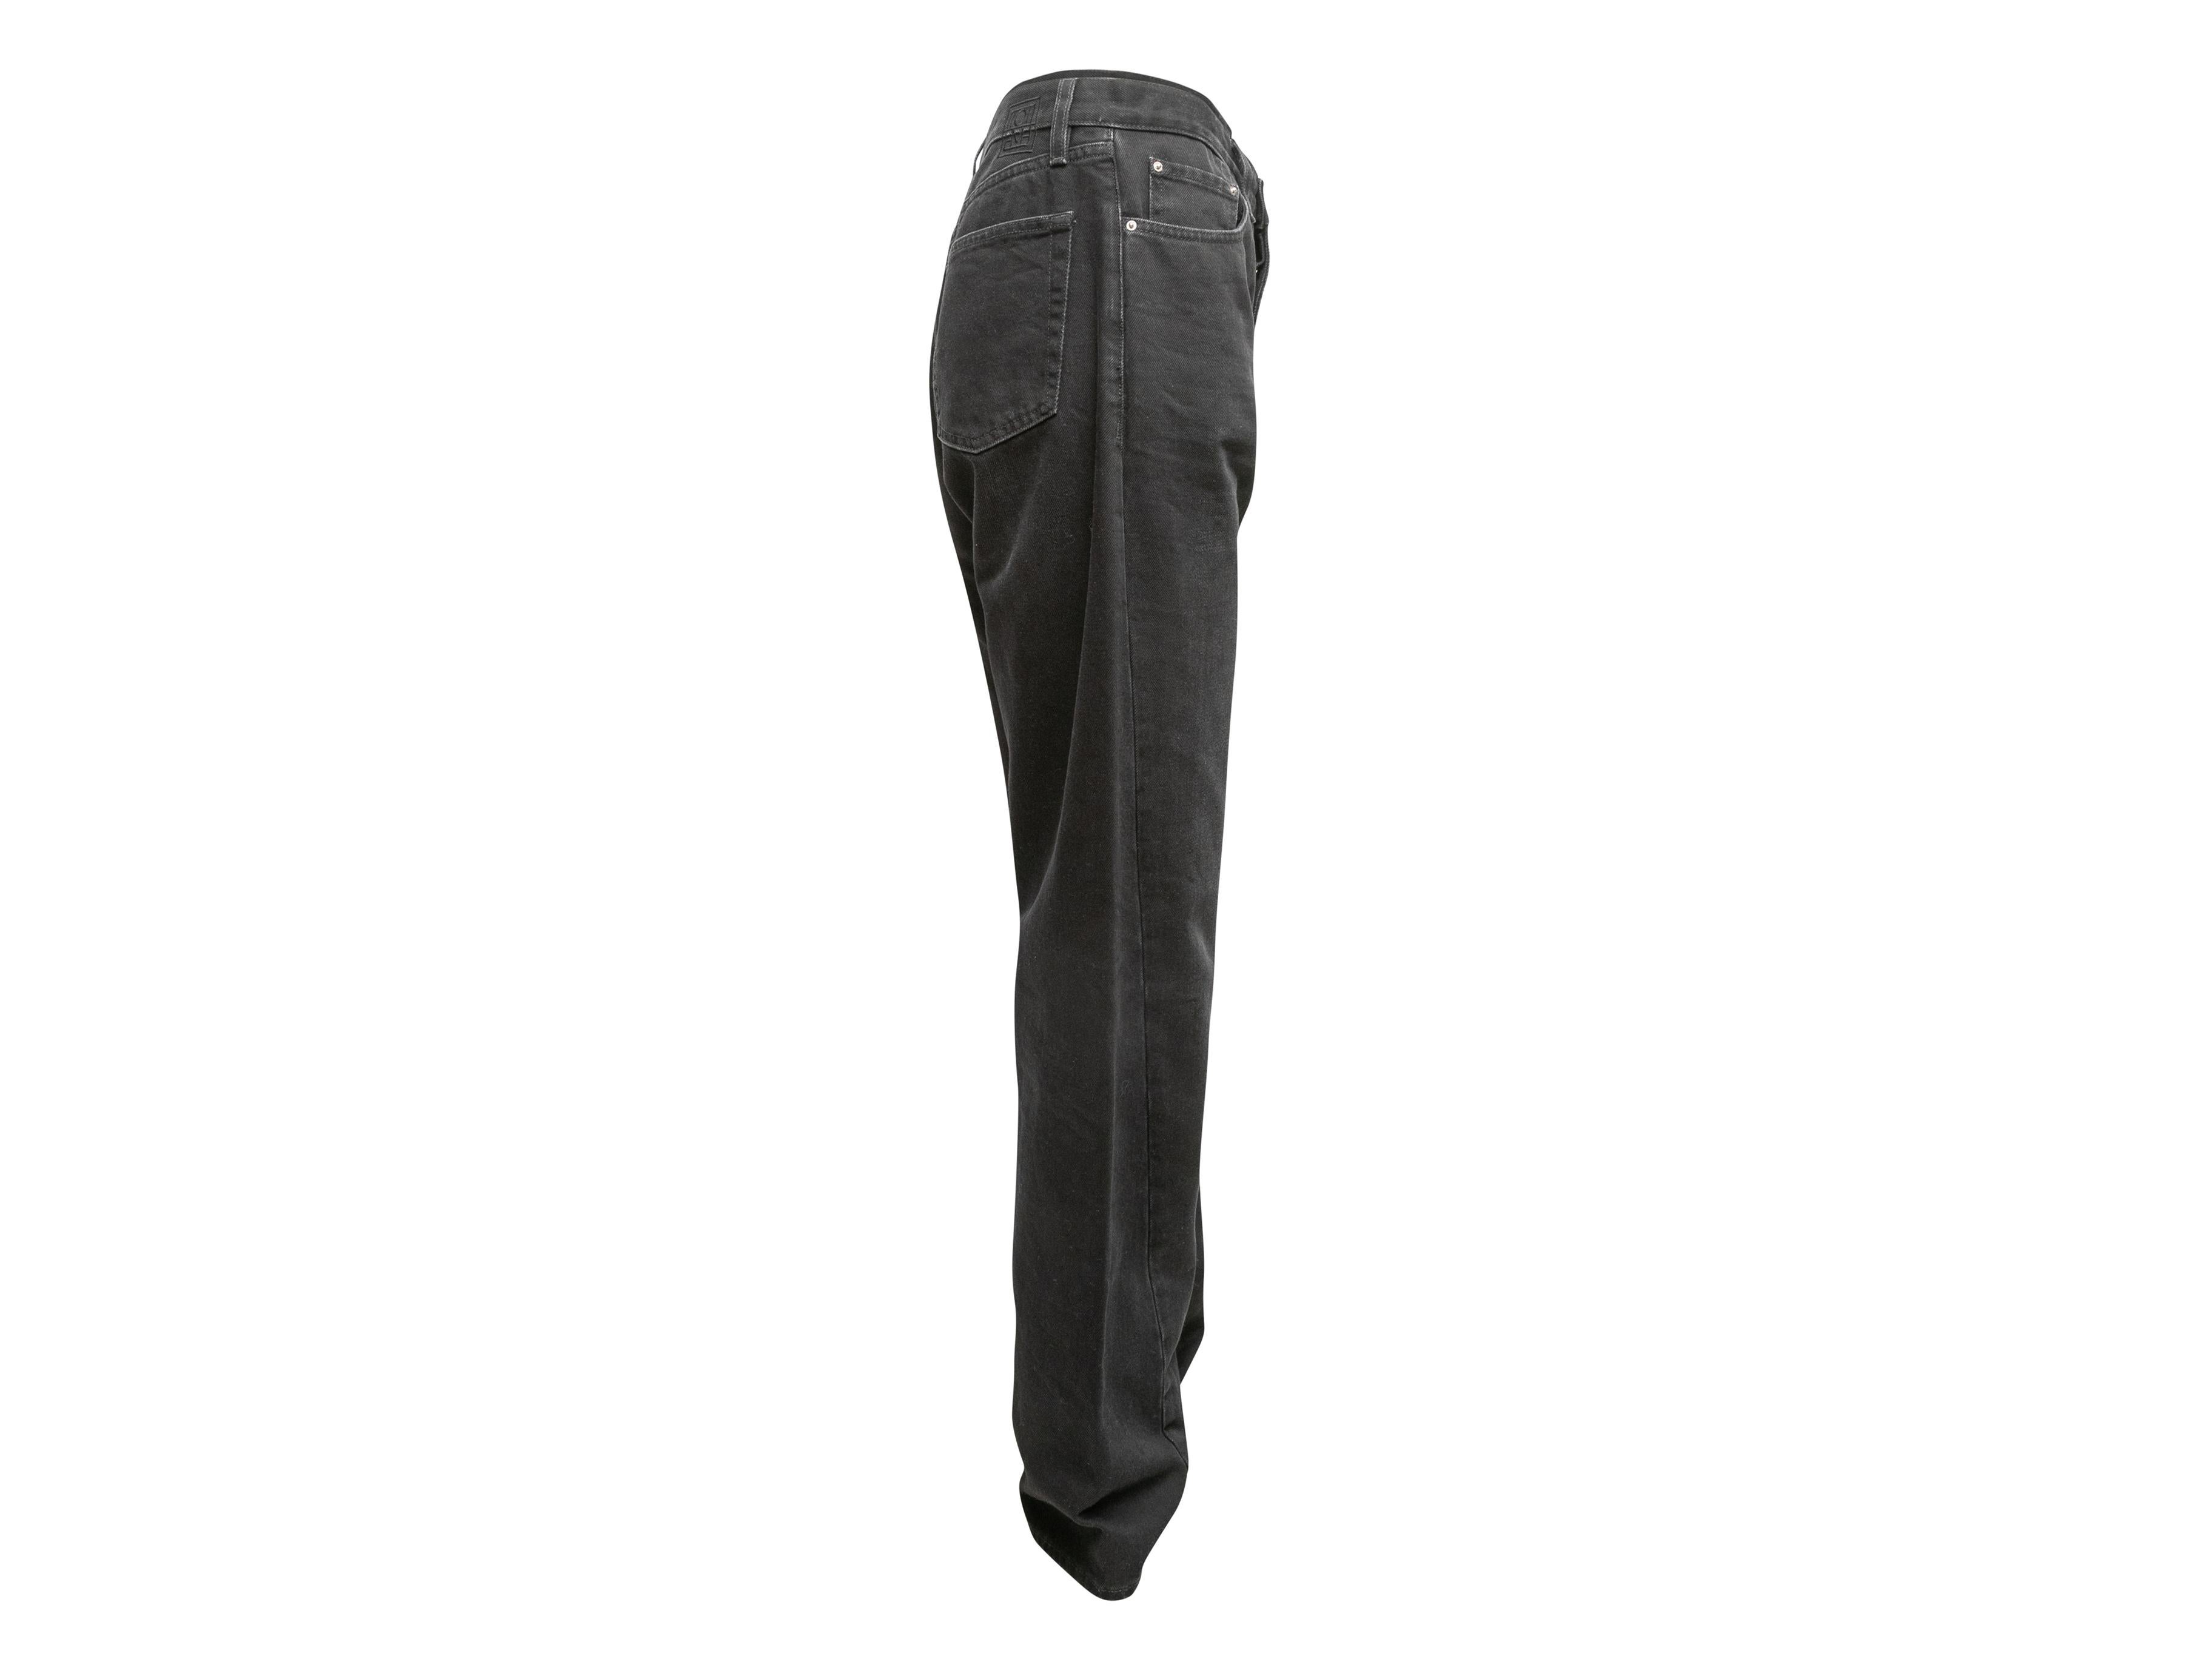 Black wide-leg jeans by Toteme. Five pockets. Zip and button closures at front. 30